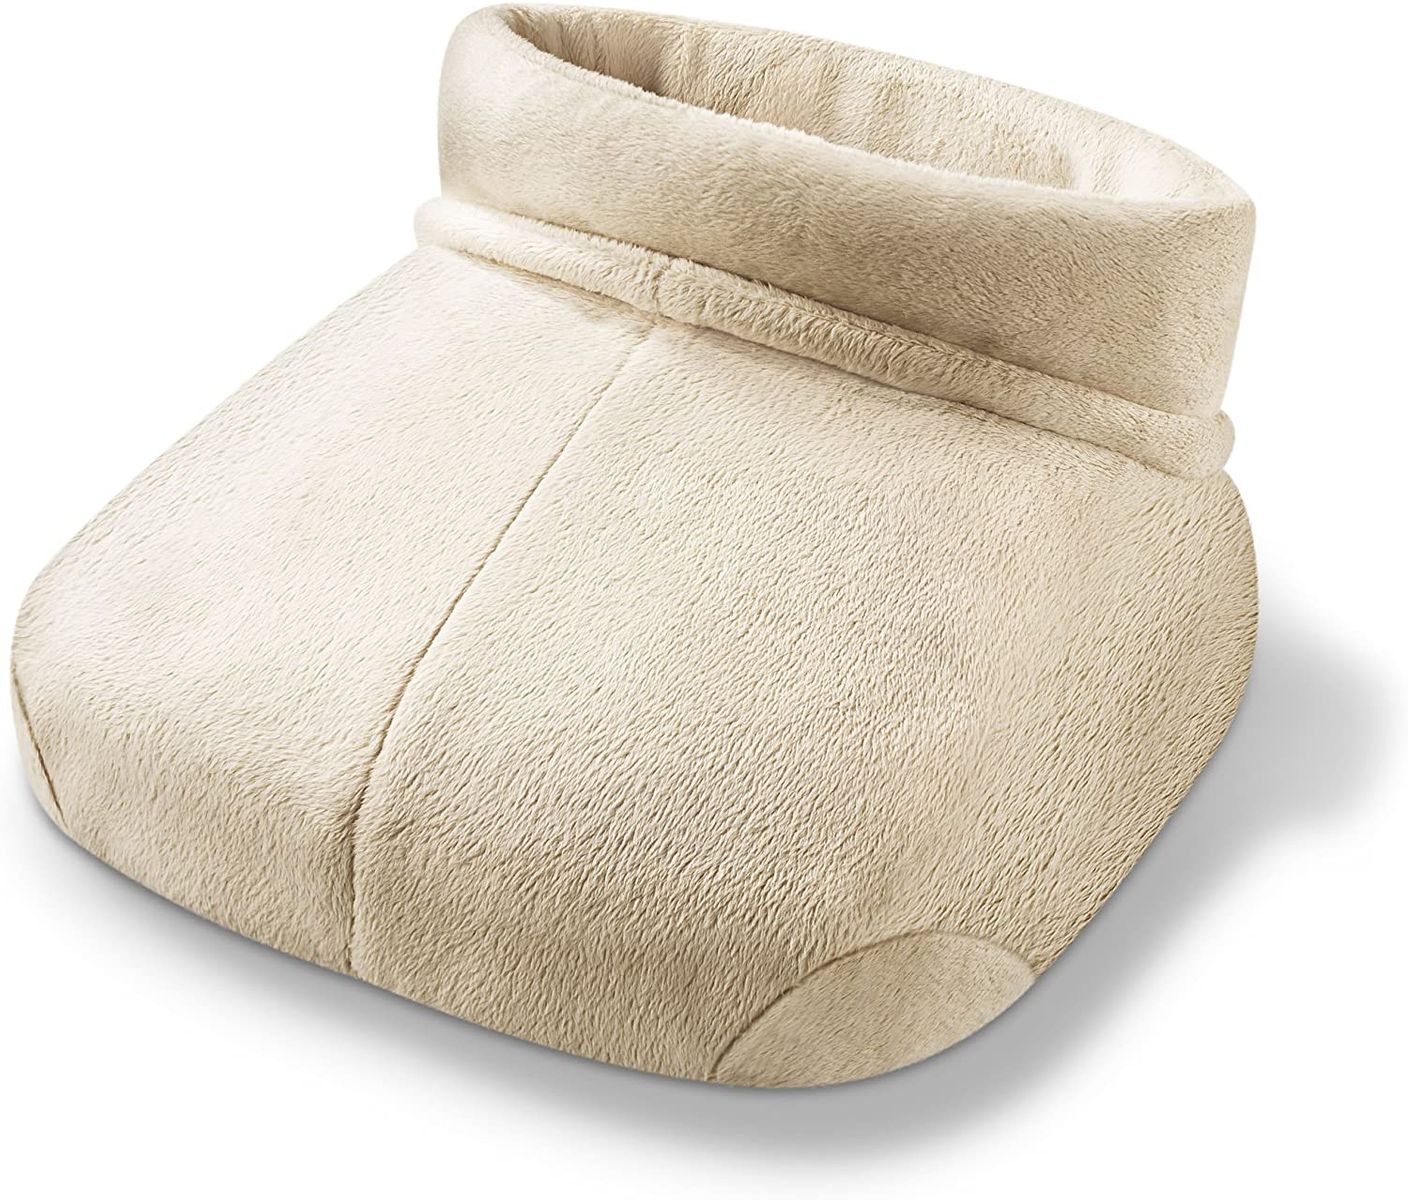 Beurer FWM 50 Shiatsu foot warmer (with massage and temperature function, suitable for large feet).